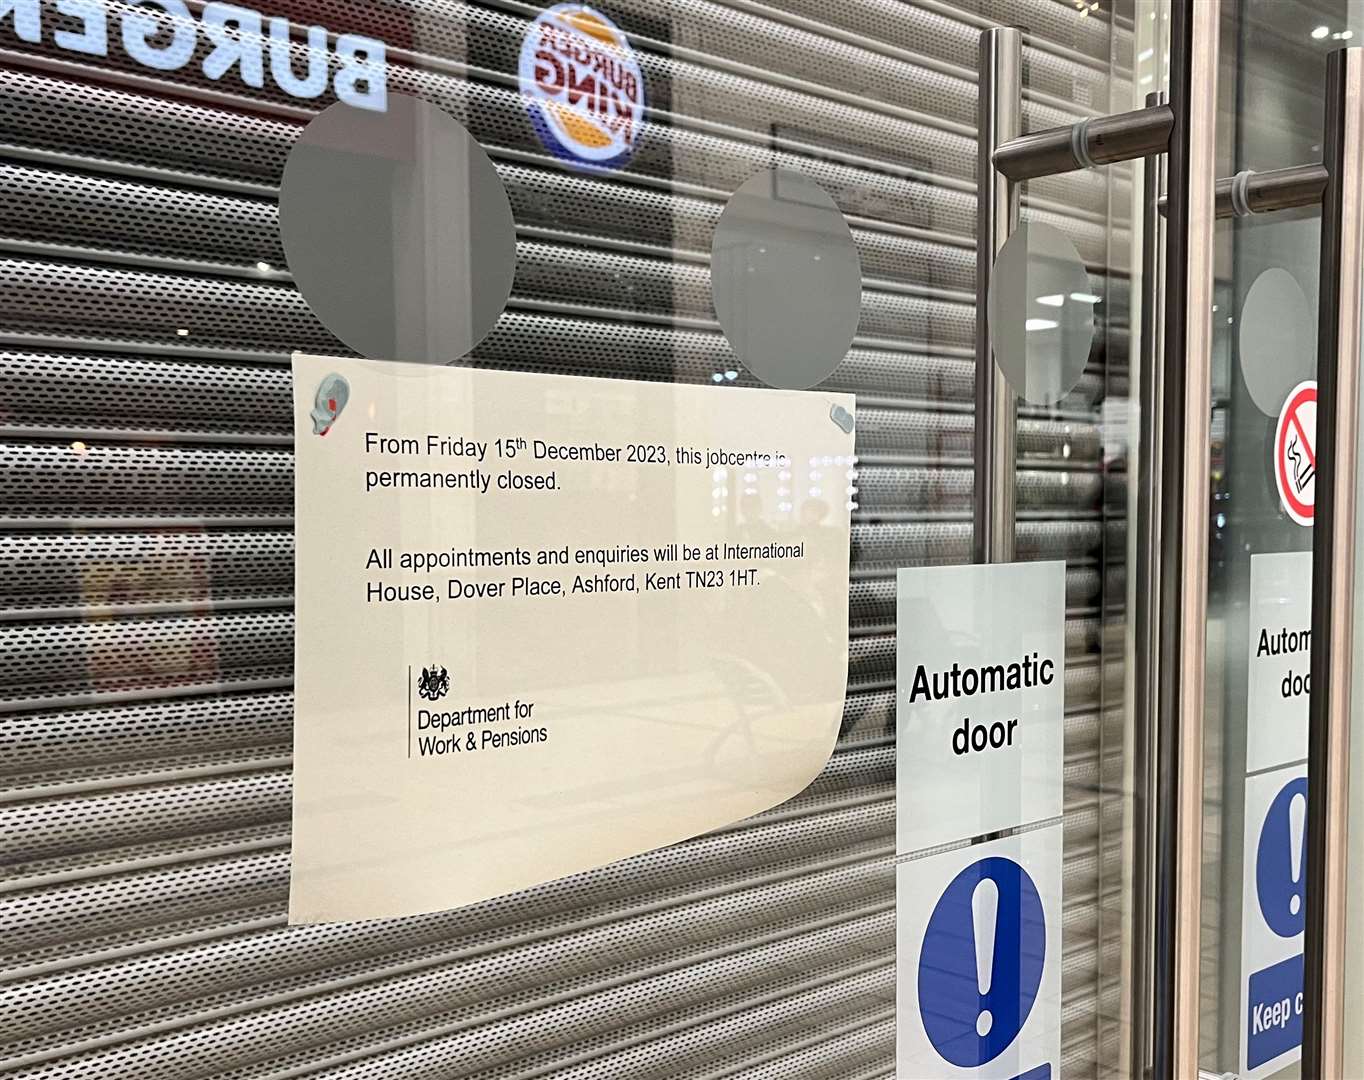 A sign on the door says the site closed on December 15